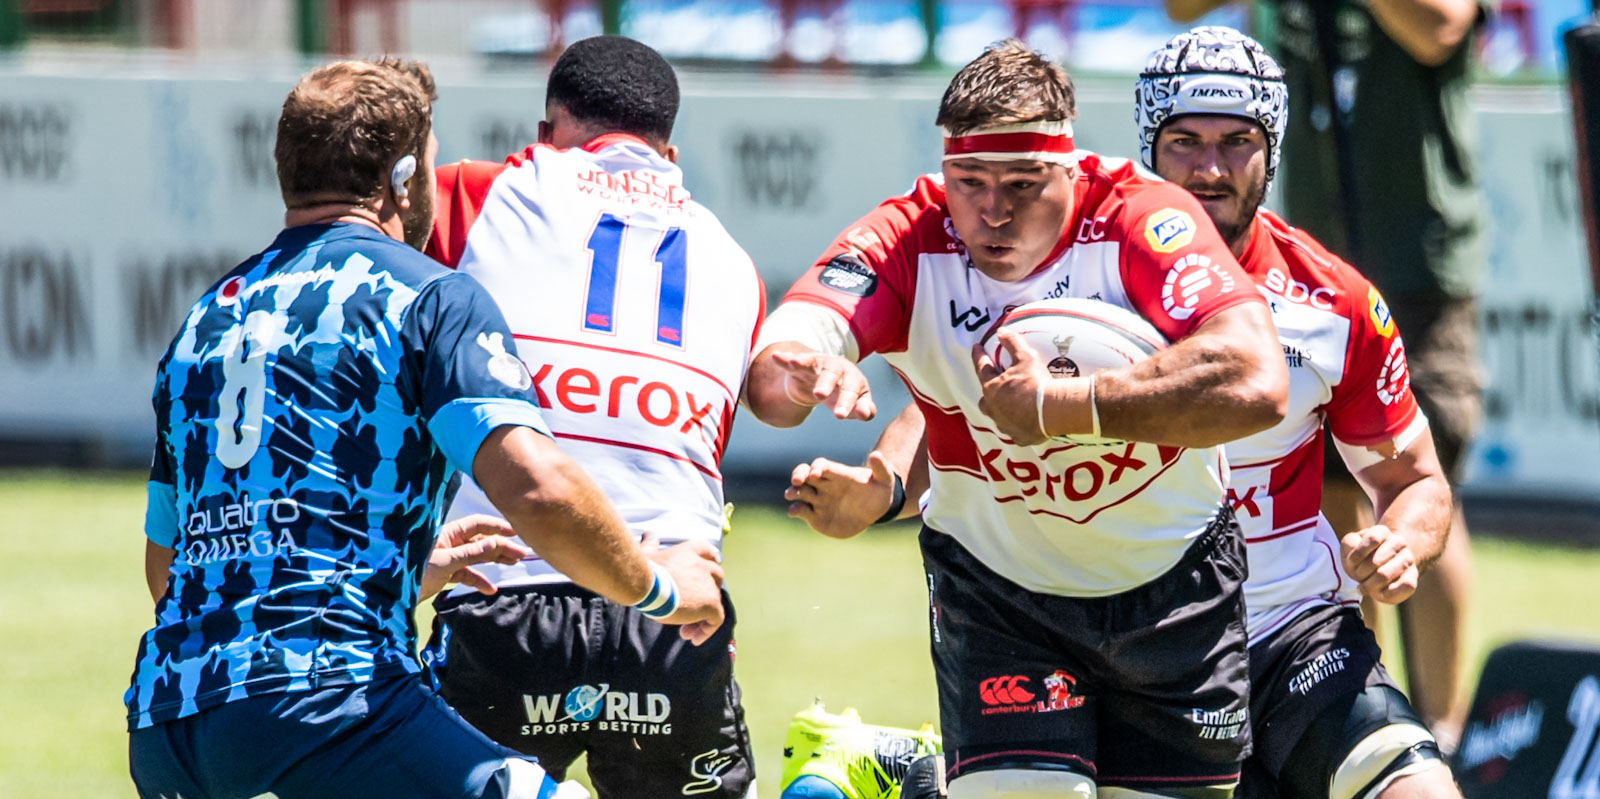 Willem Alberts scored one of the Xerox Lions' three tries